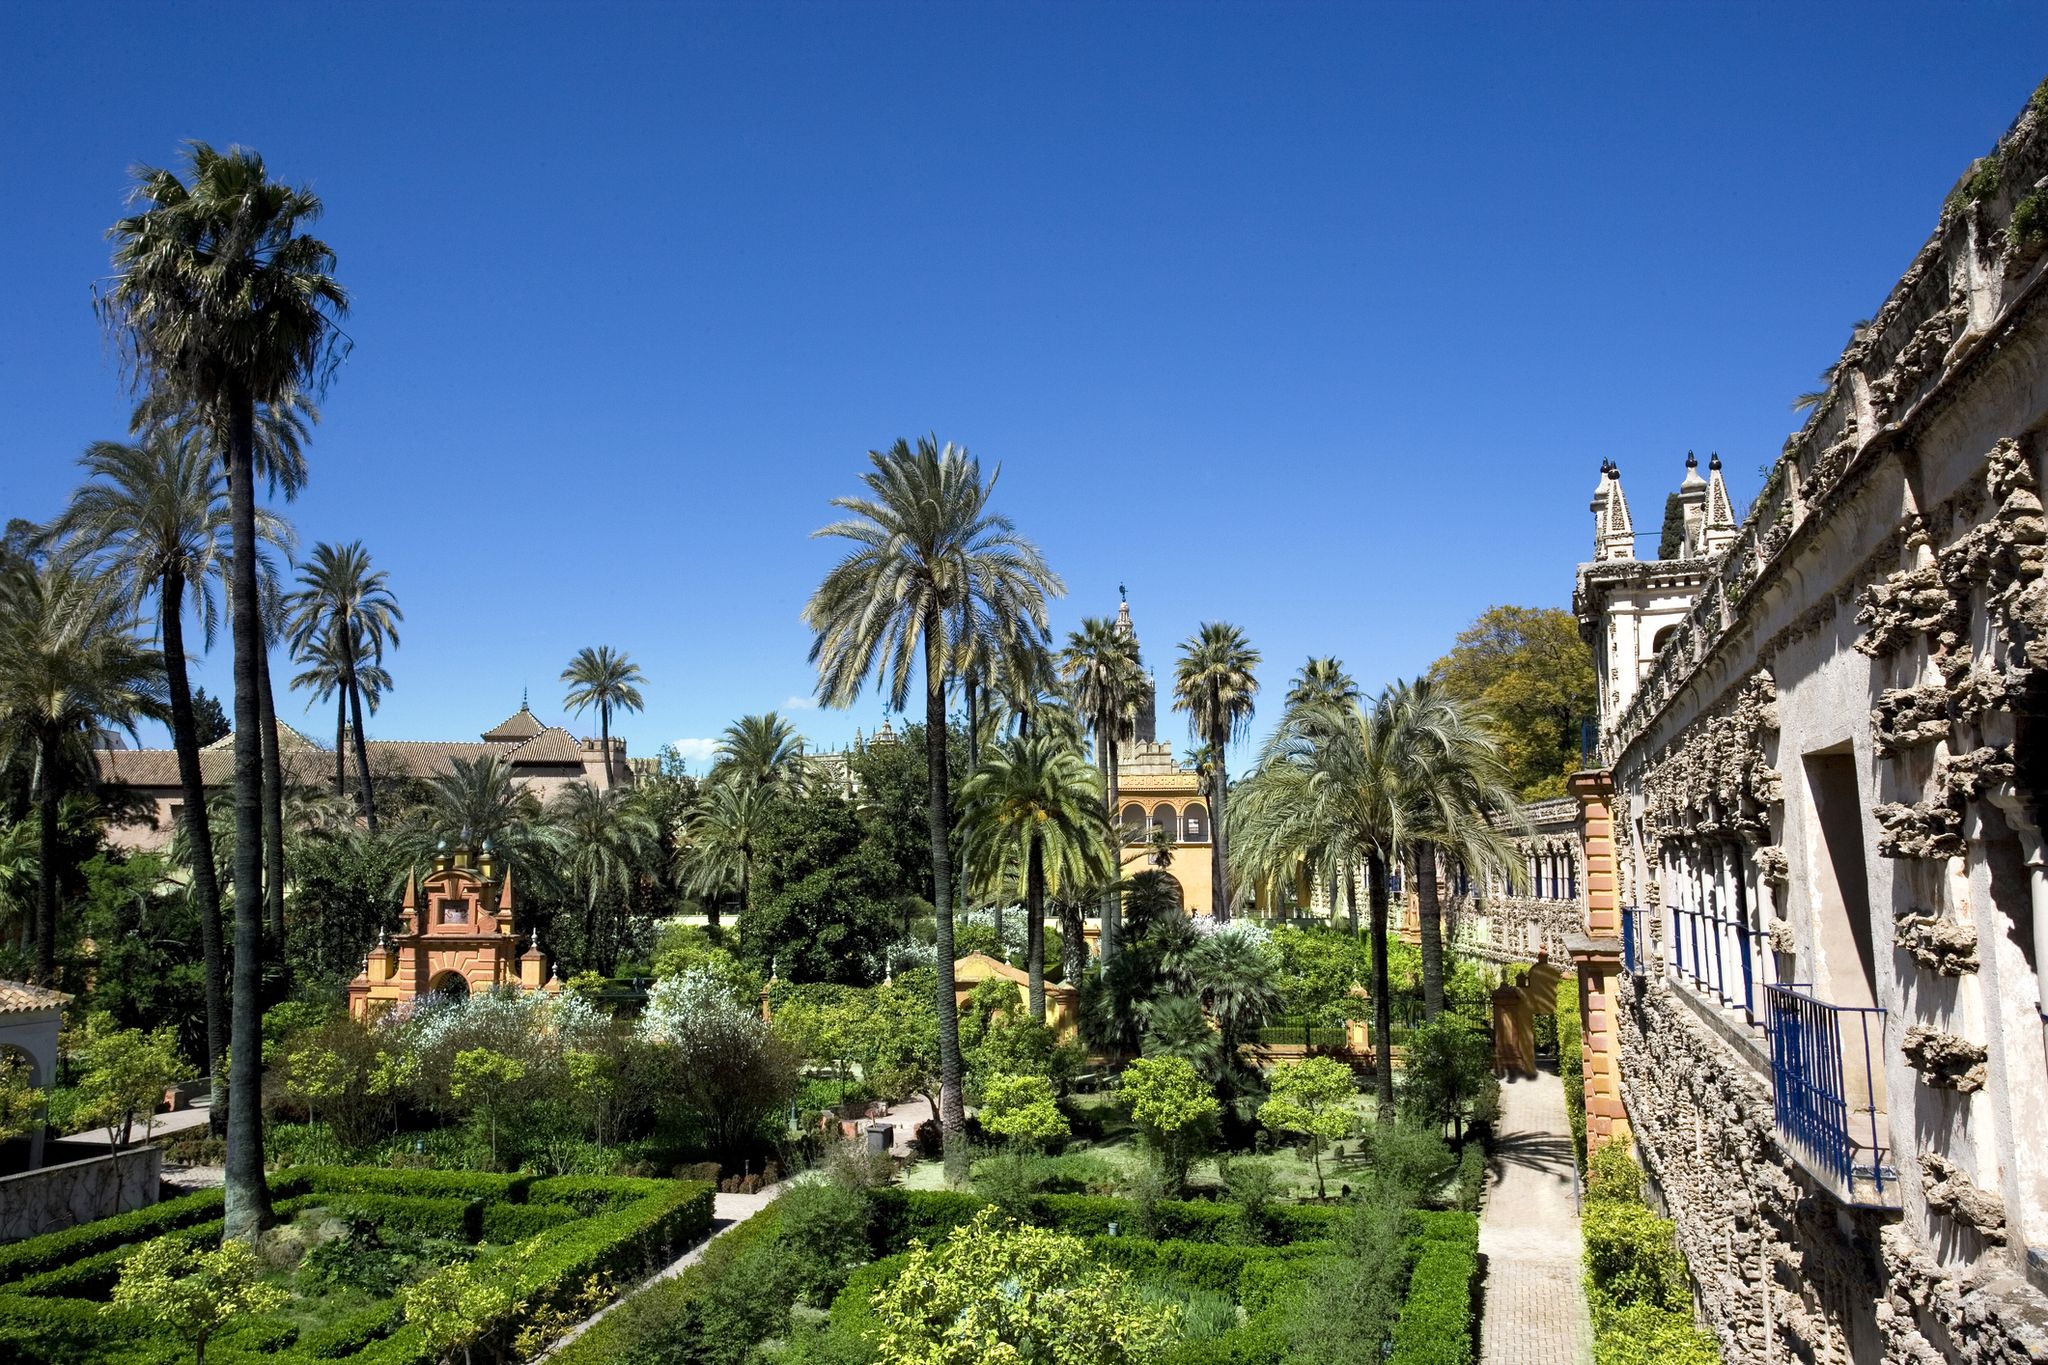 Game of Thrones locations: Seville